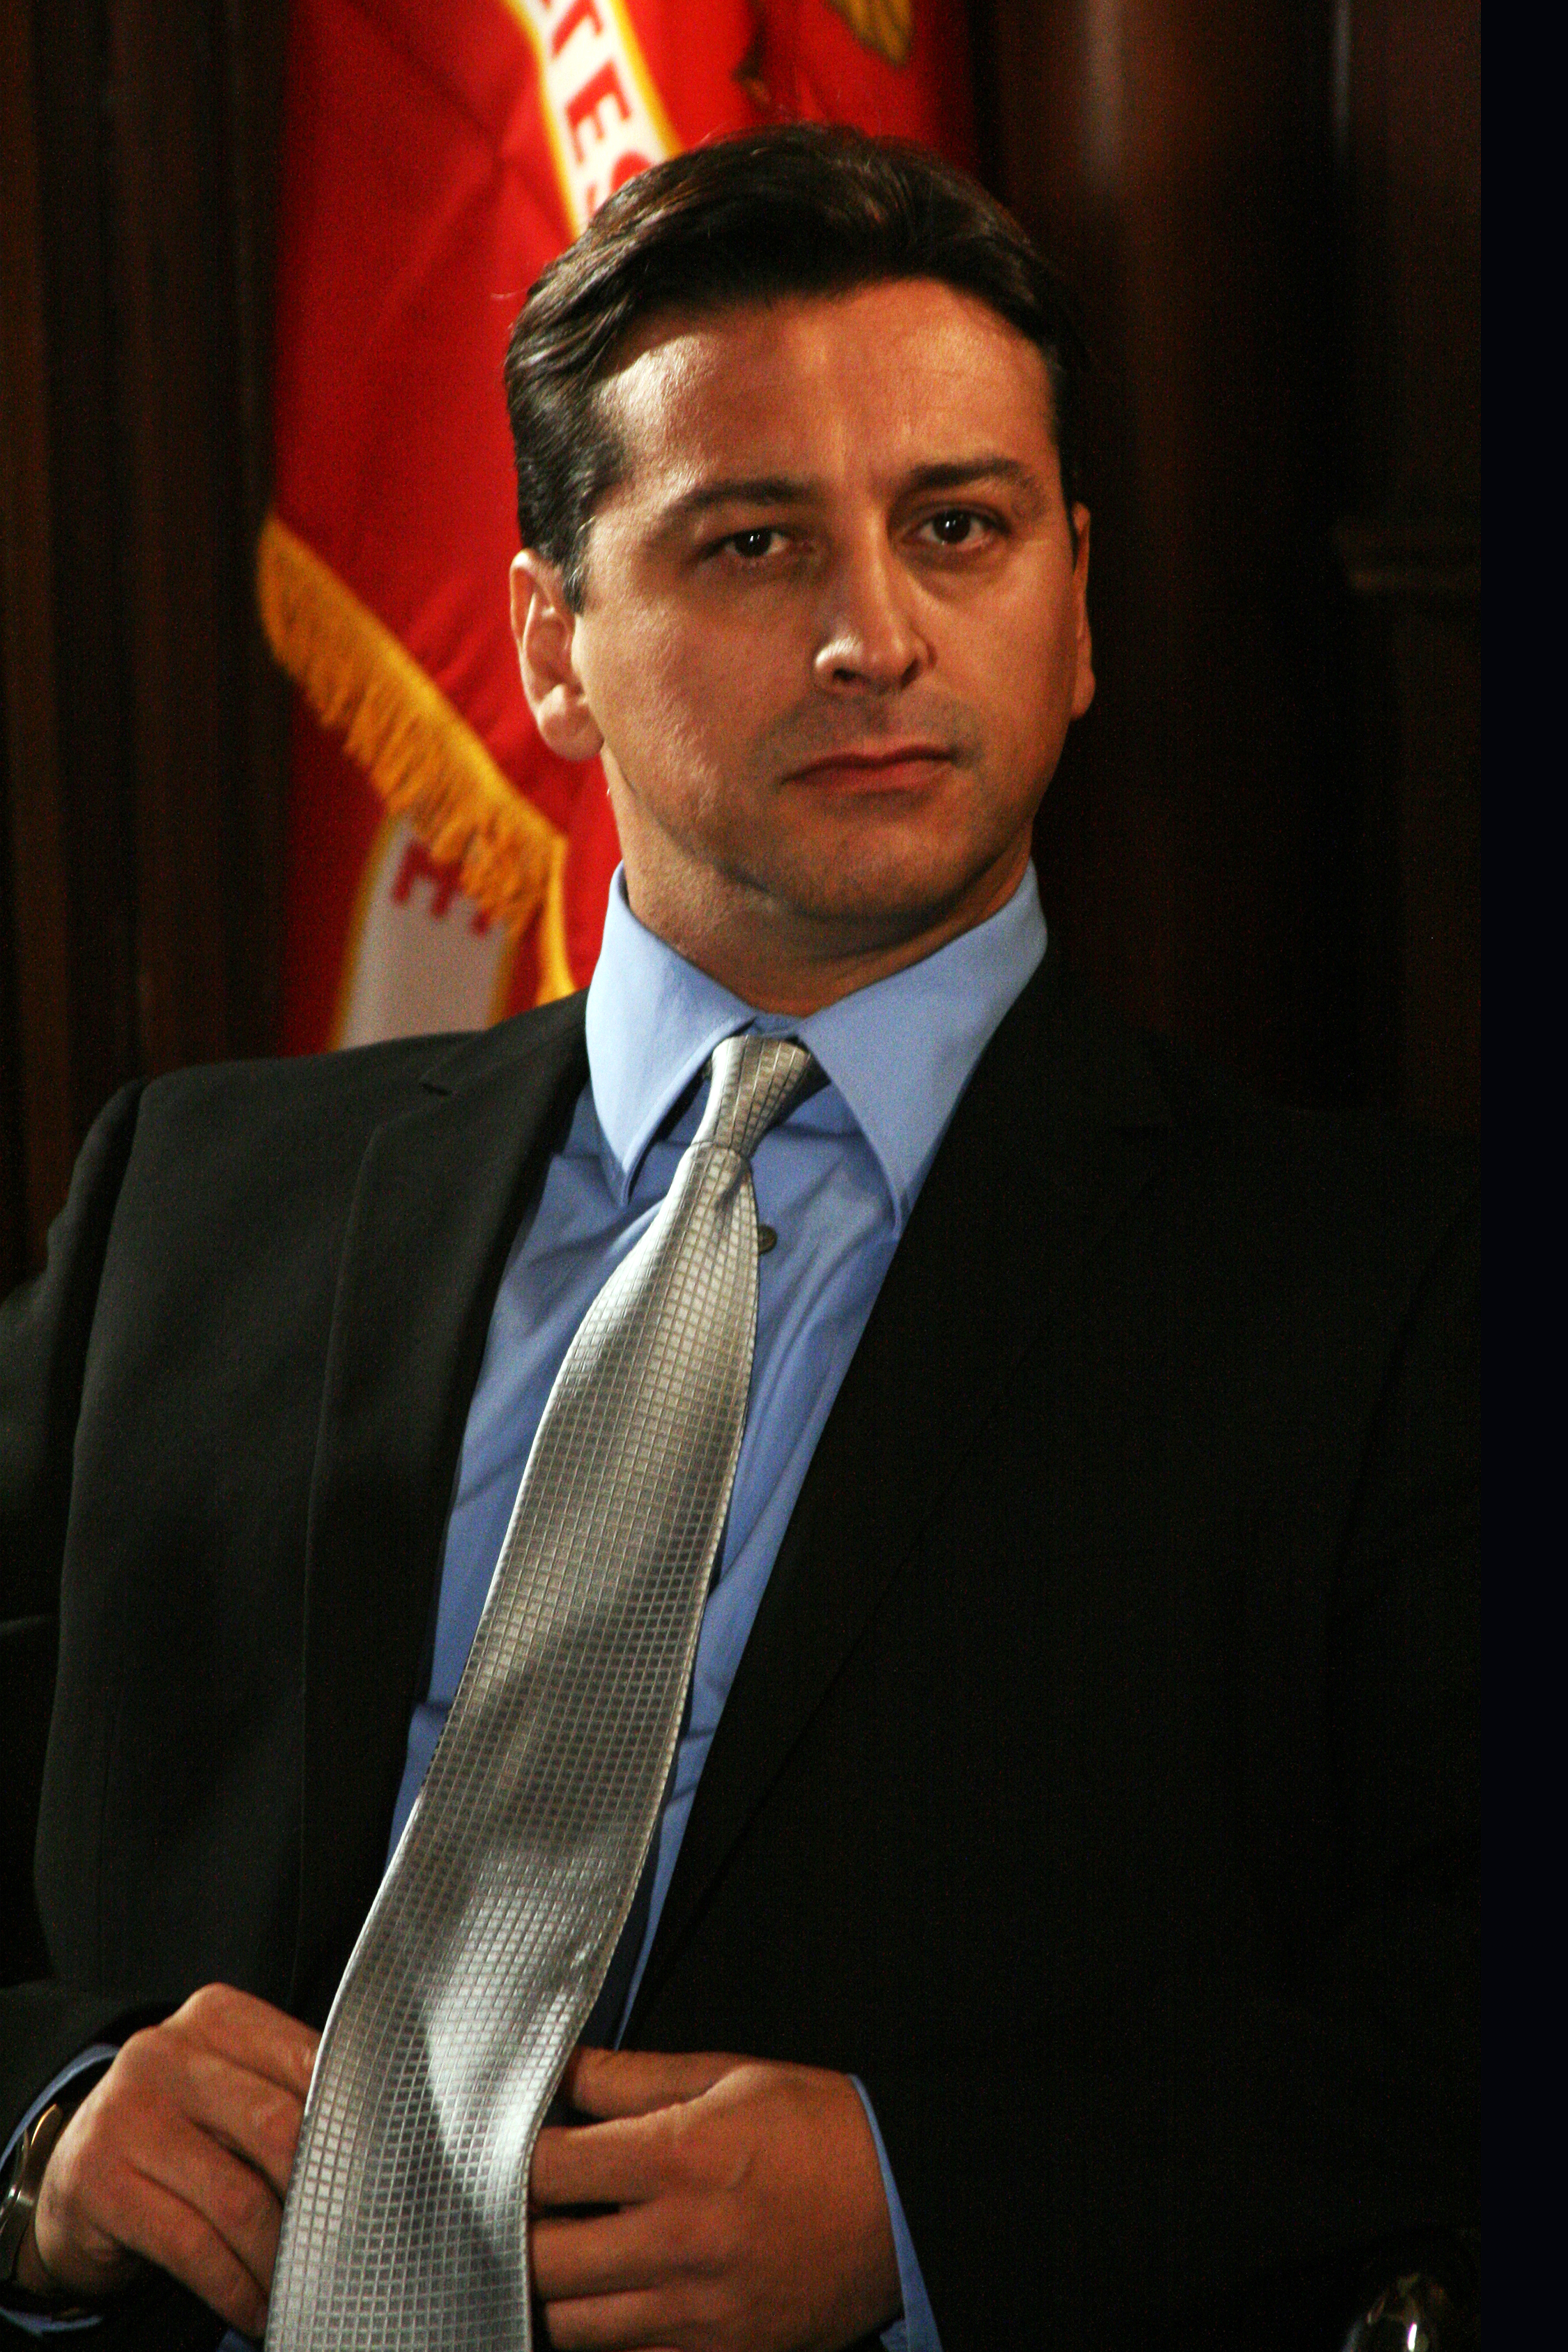 Walter Alza as John Colina in Conduct Unbecoming 2010